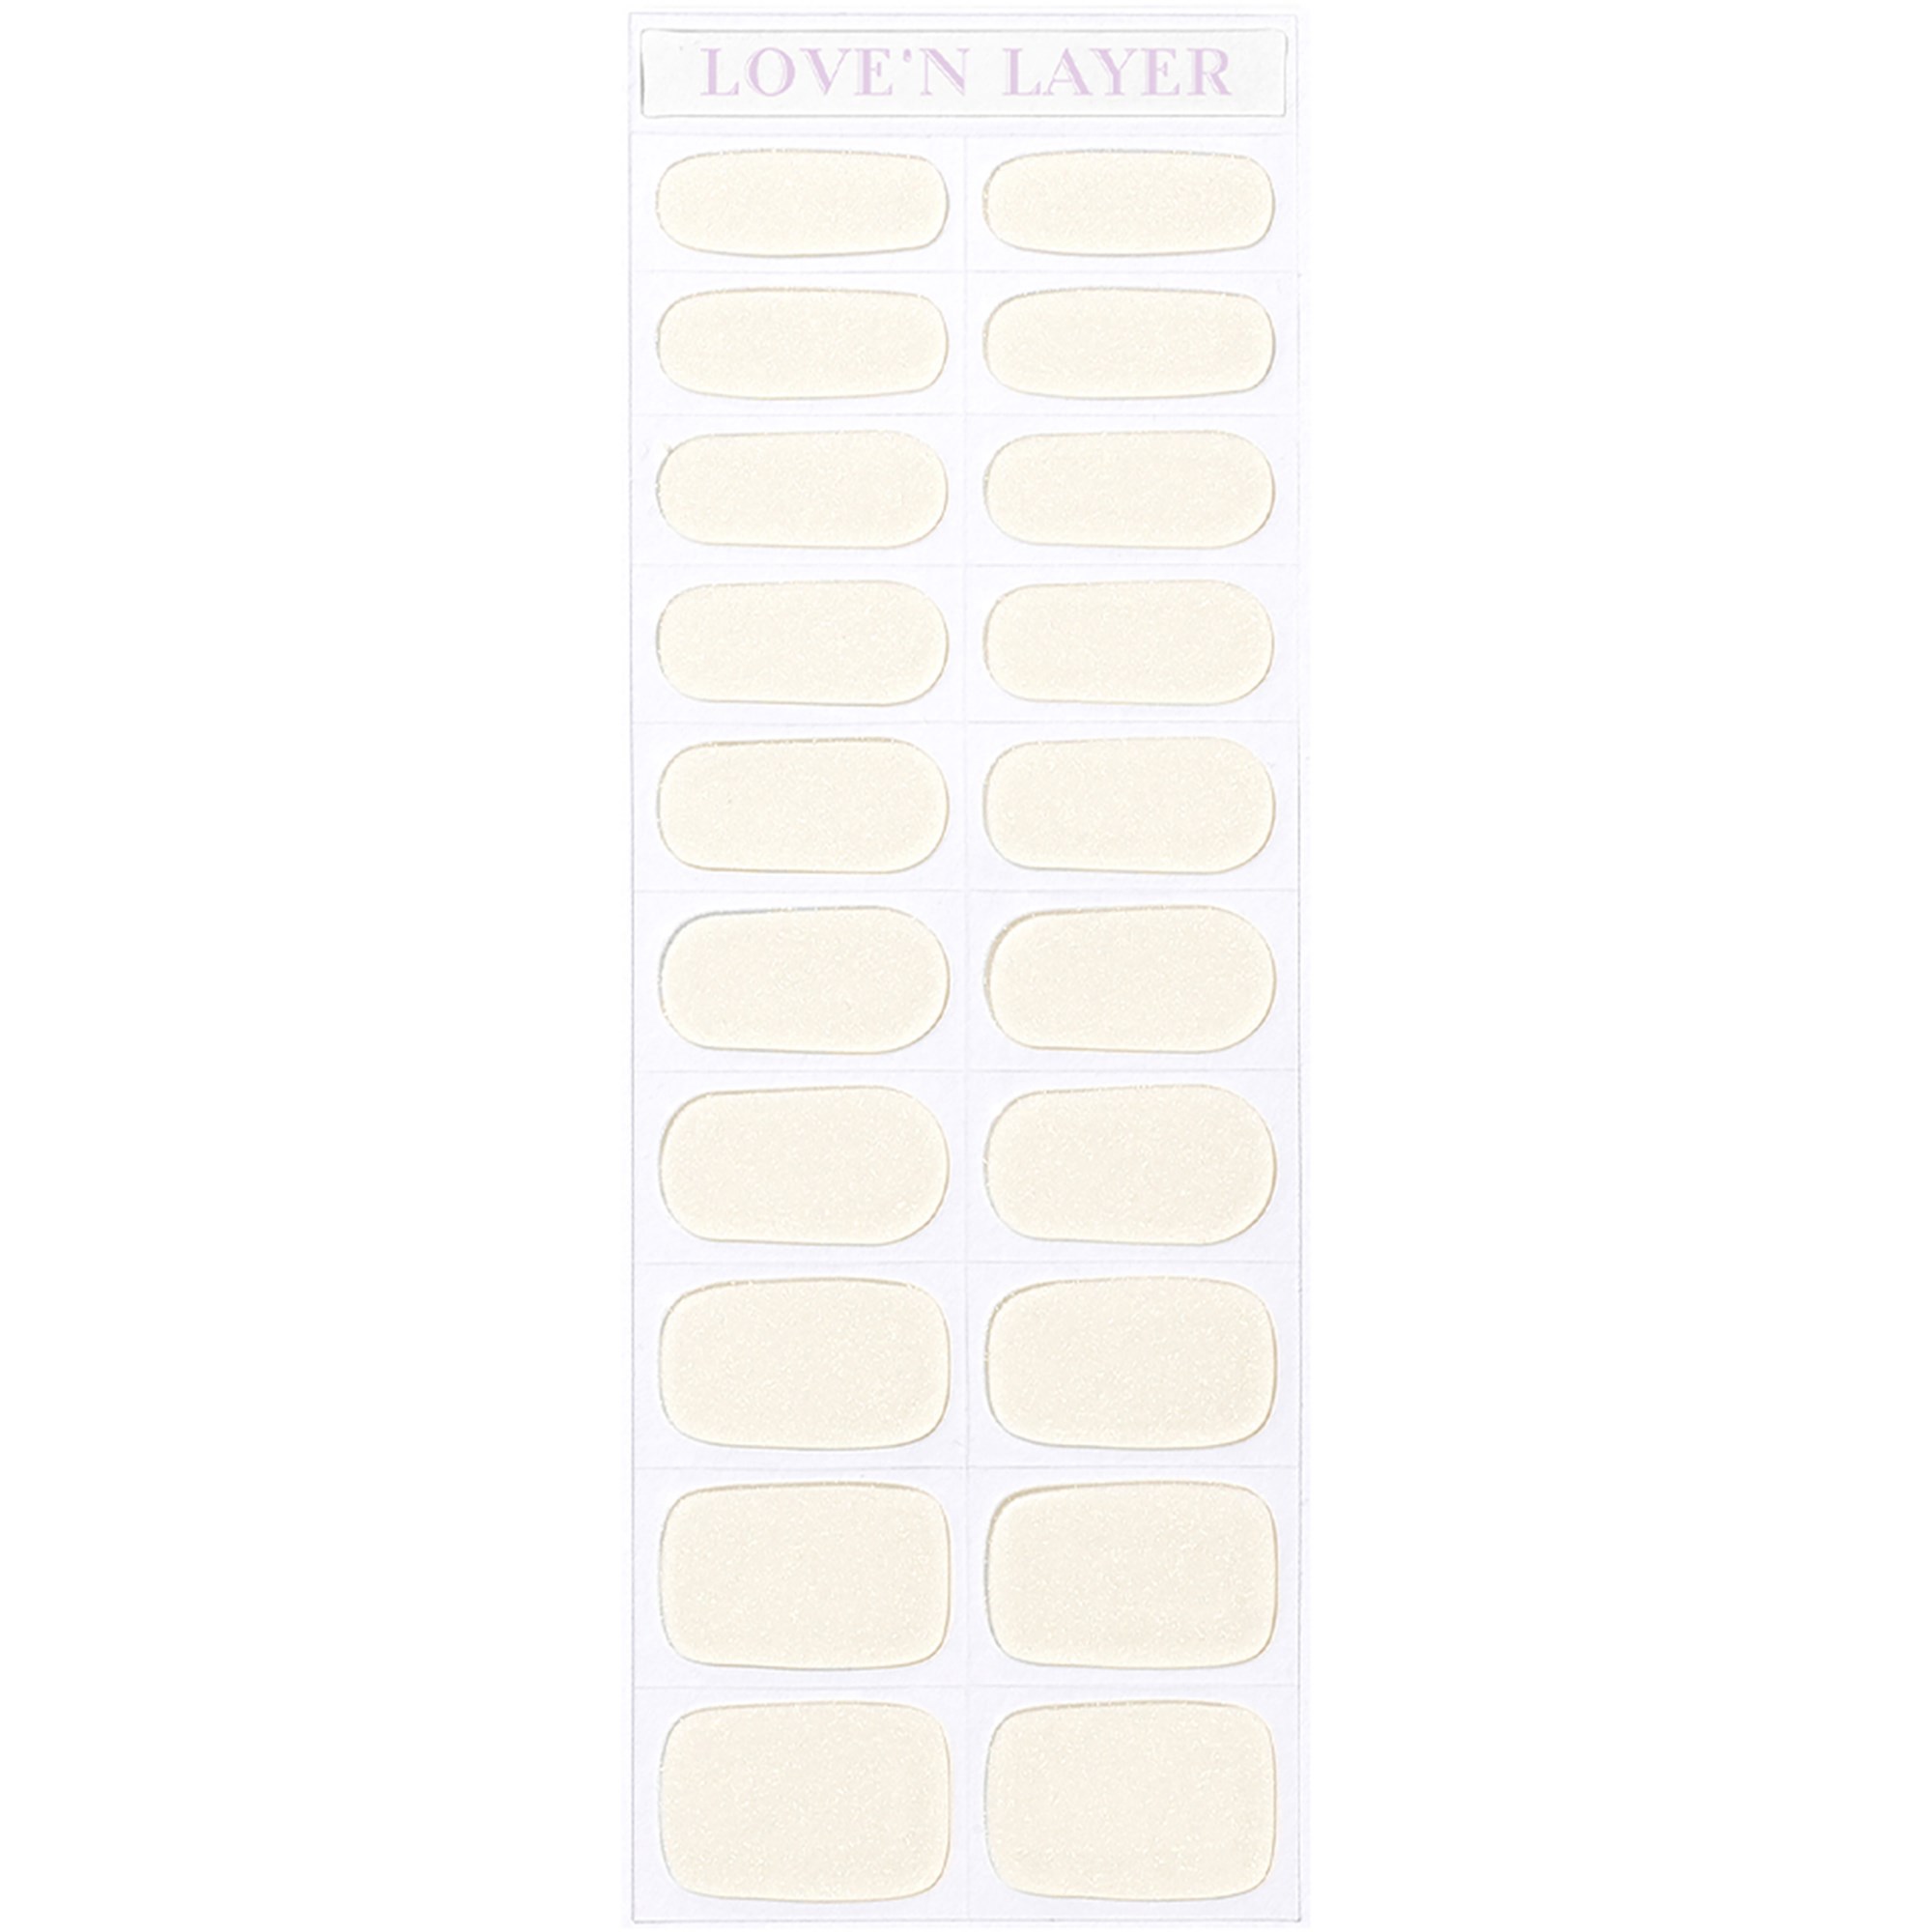 Loven Layer Ocean Pearl Layers Gold